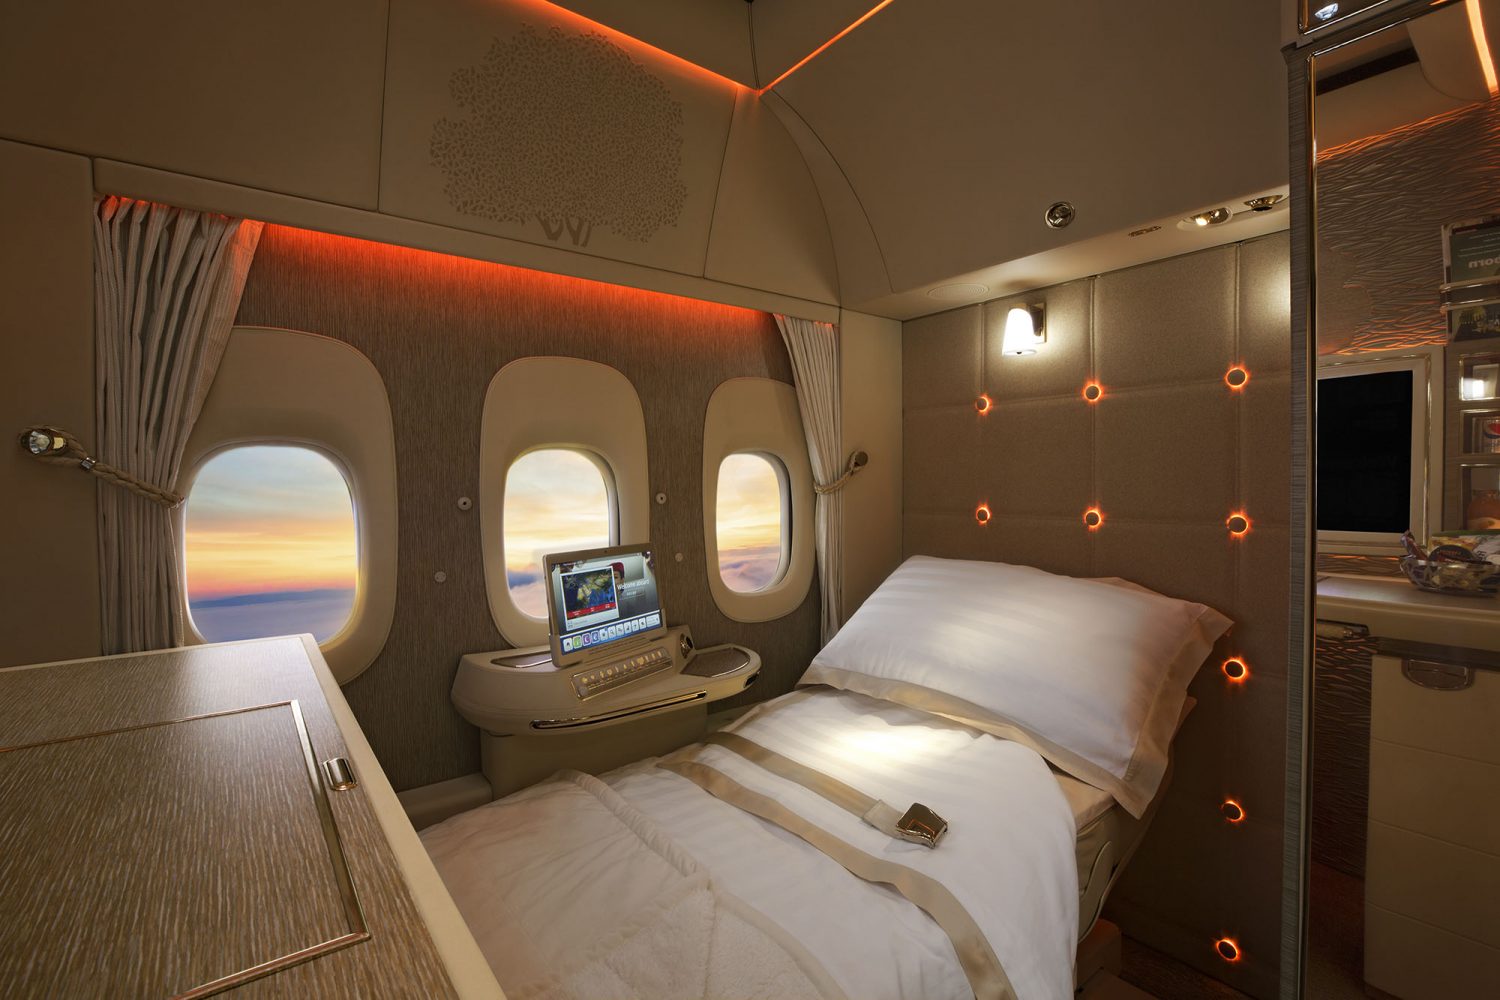 In interior photograph showing the 'Game Changer' First Class cabins on board an Emirates Airline Boeing 777 by photographer, Duncan Chard